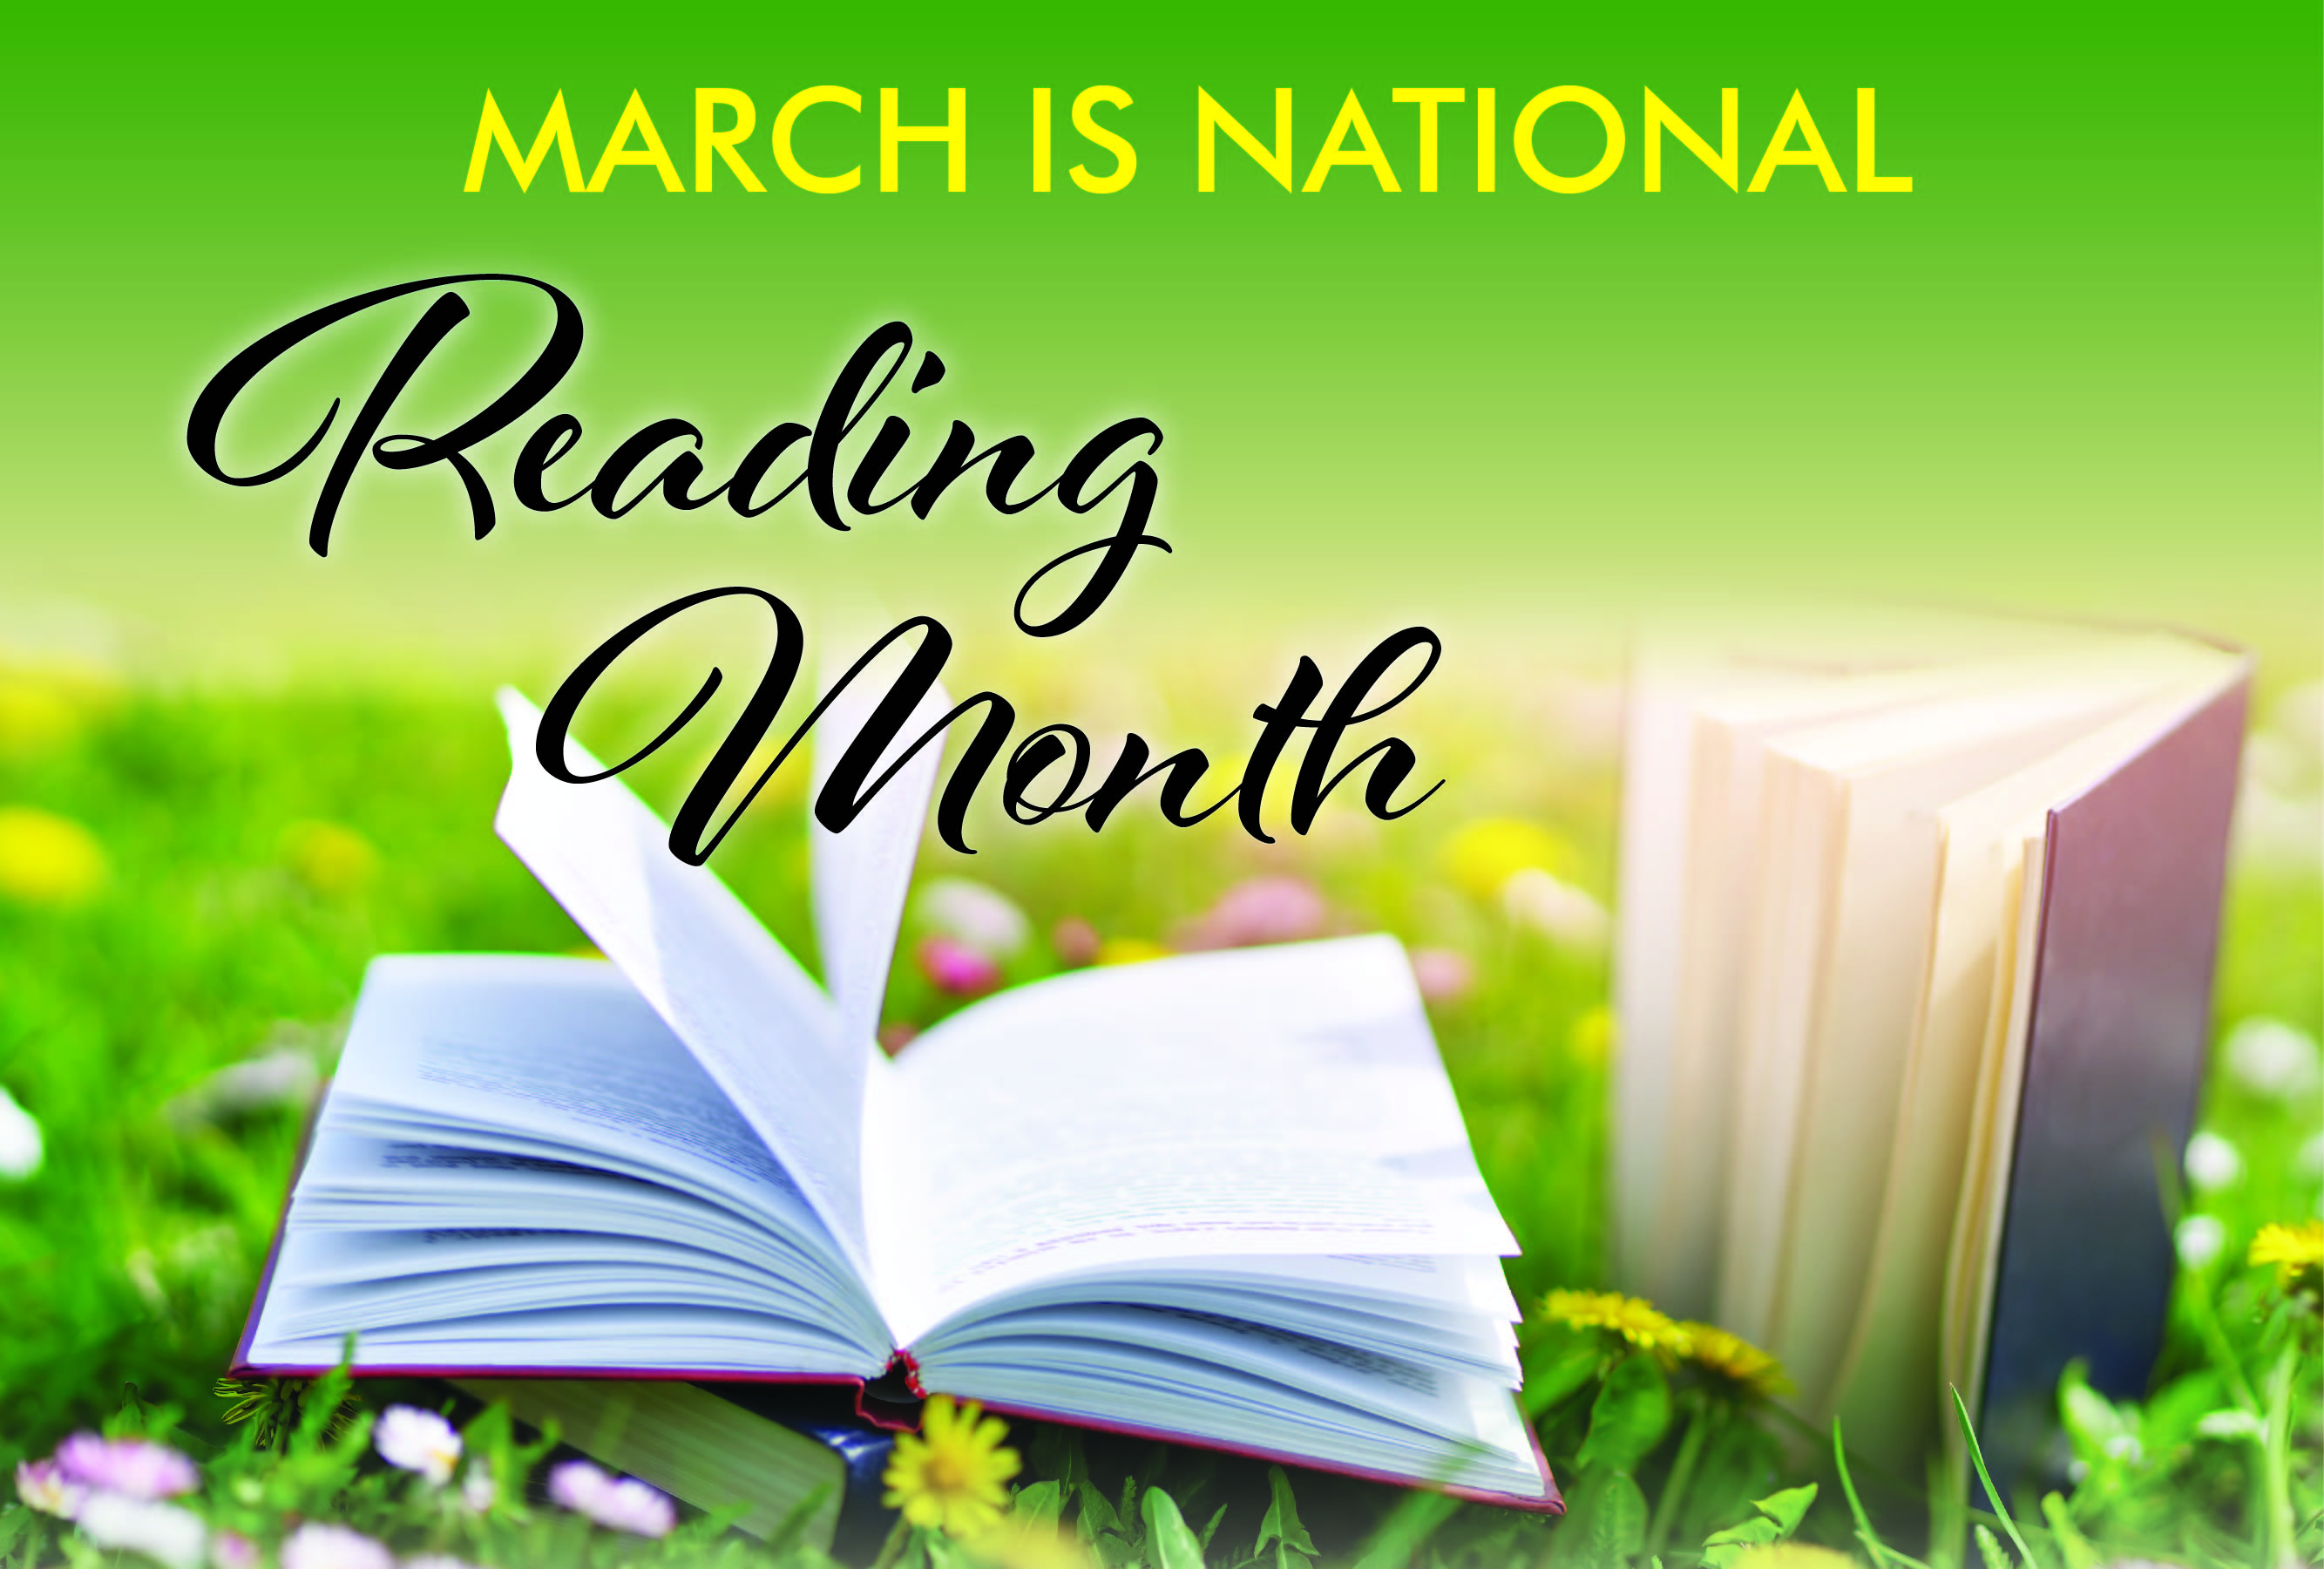 national reading month essay